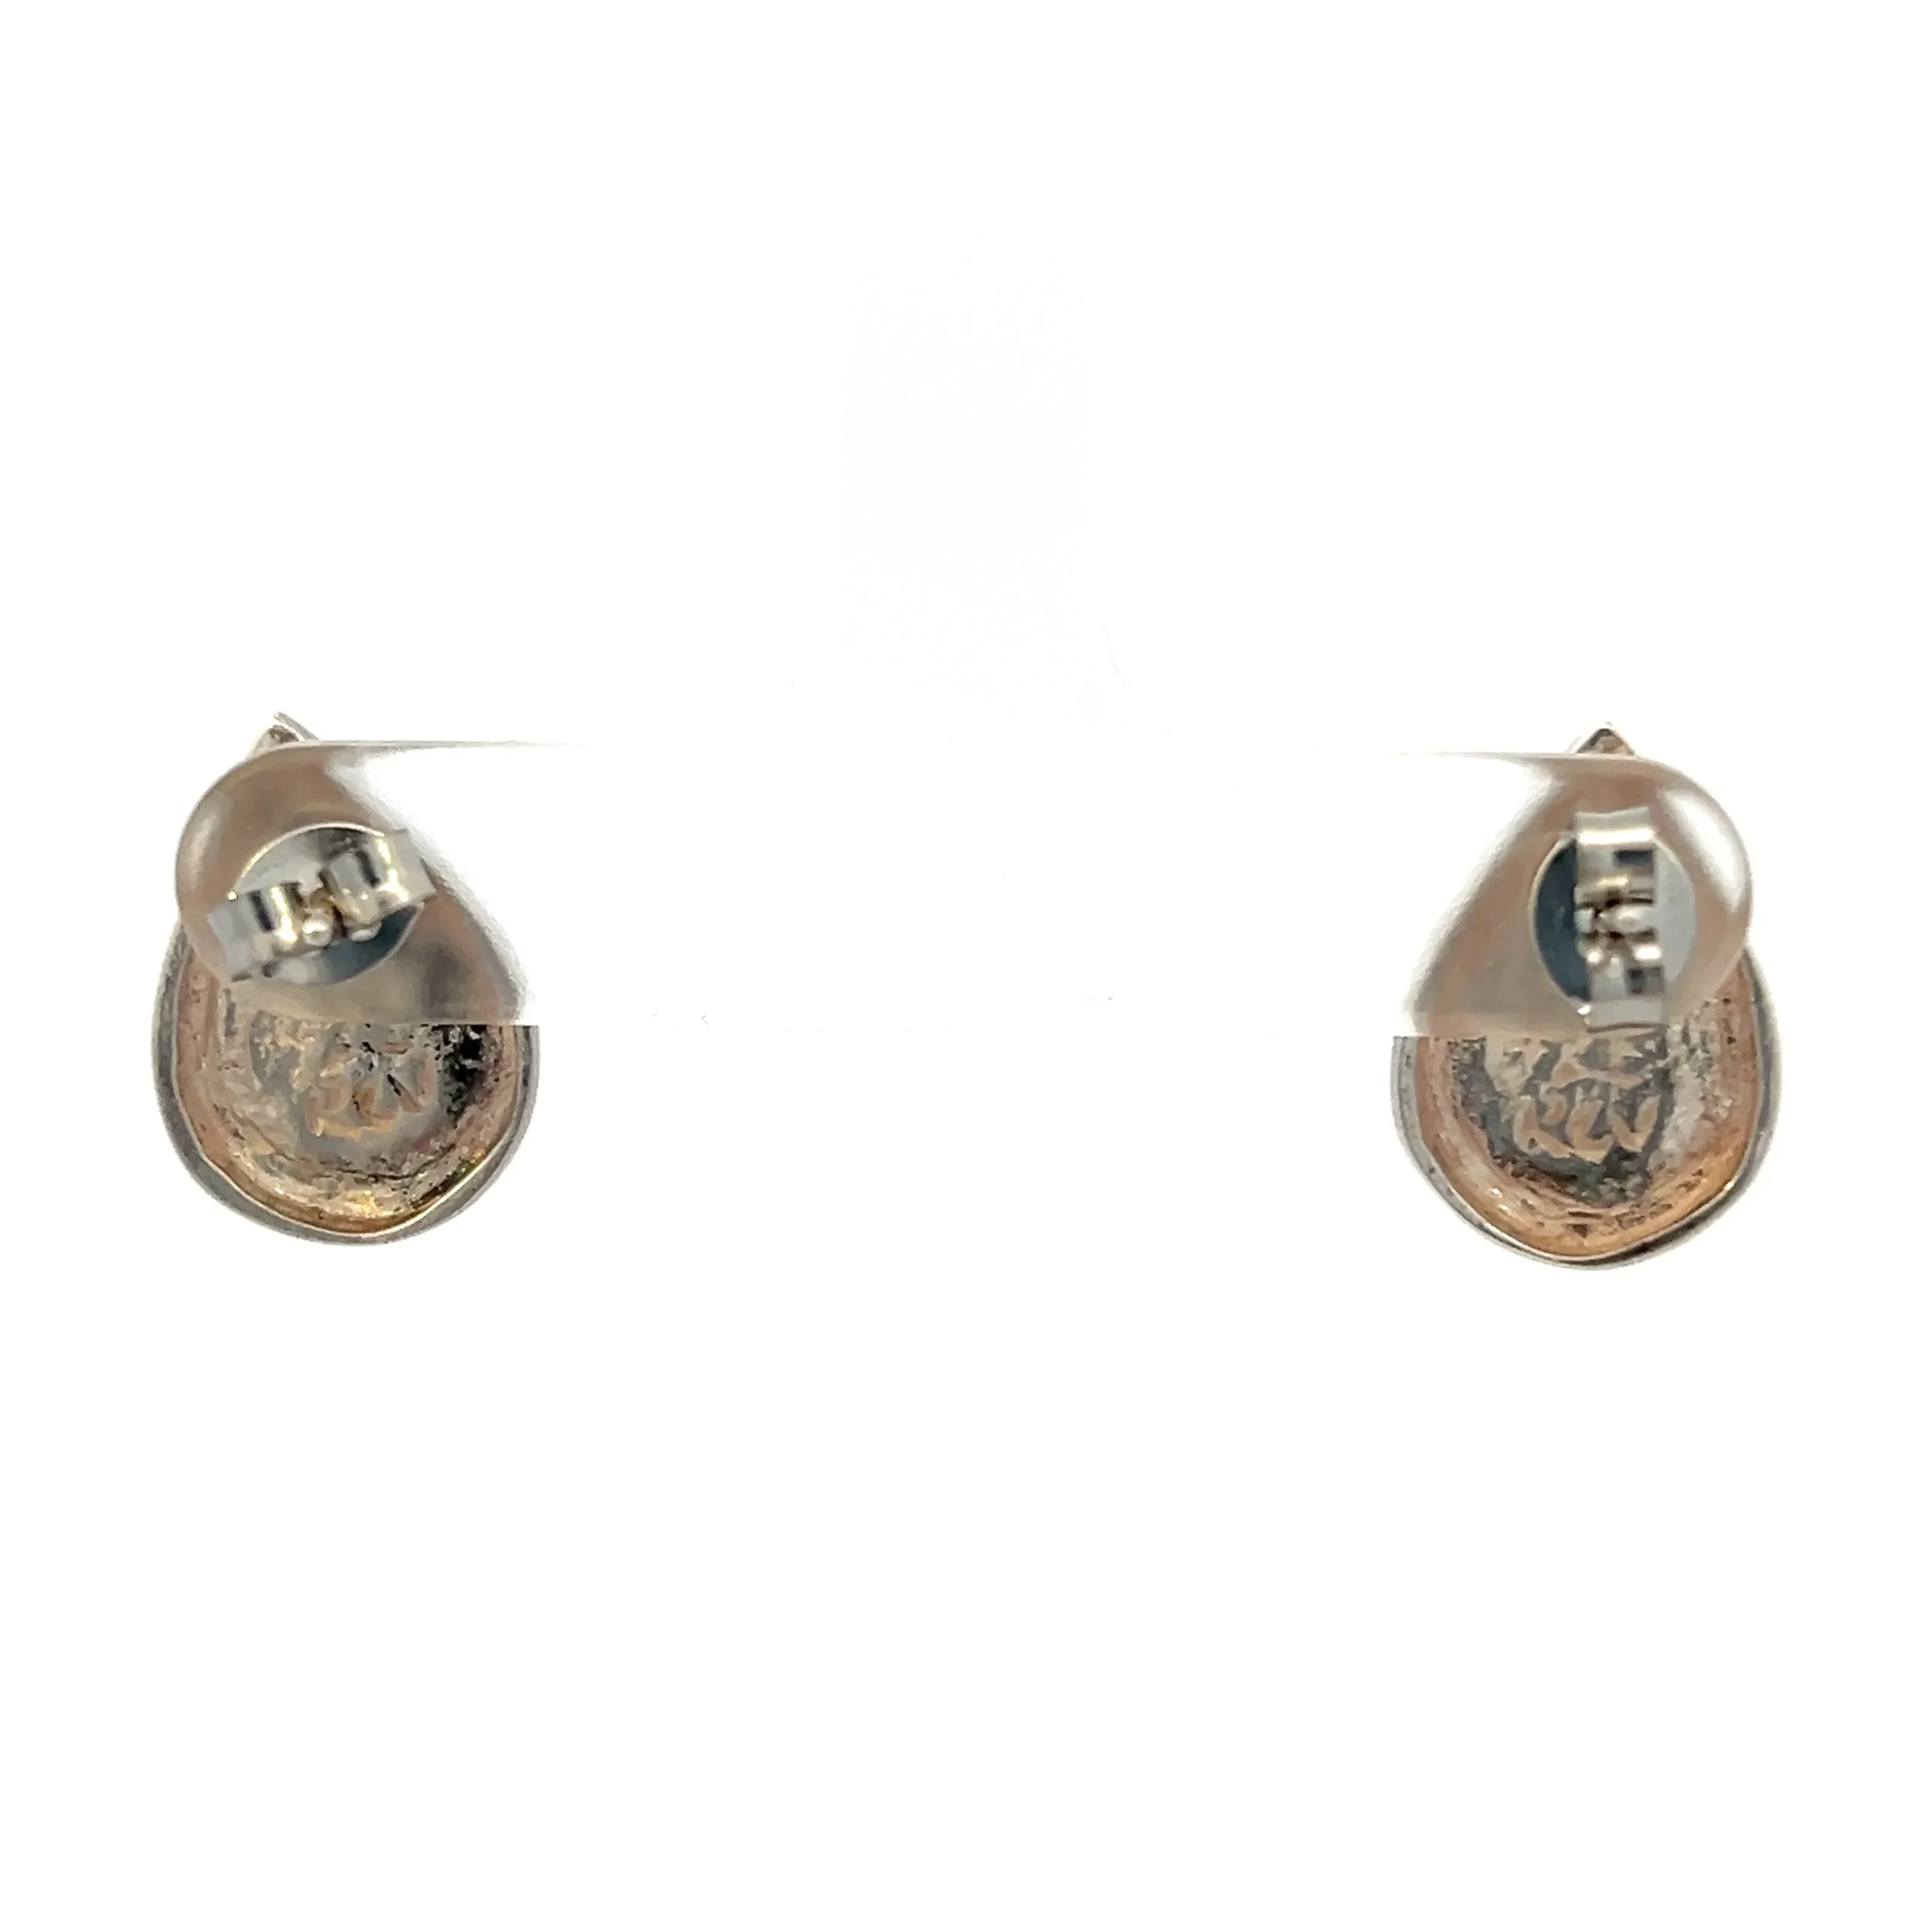 One estate pair of sterling silver pear-shaped stud earrings with an interior pear shape with yellow gold plating. The exterior pear-shaped band is sterling silver and the bottom half has geometrical etched designs. Stamped 925. total weight 2.51 grams. Friction posts and backs. 